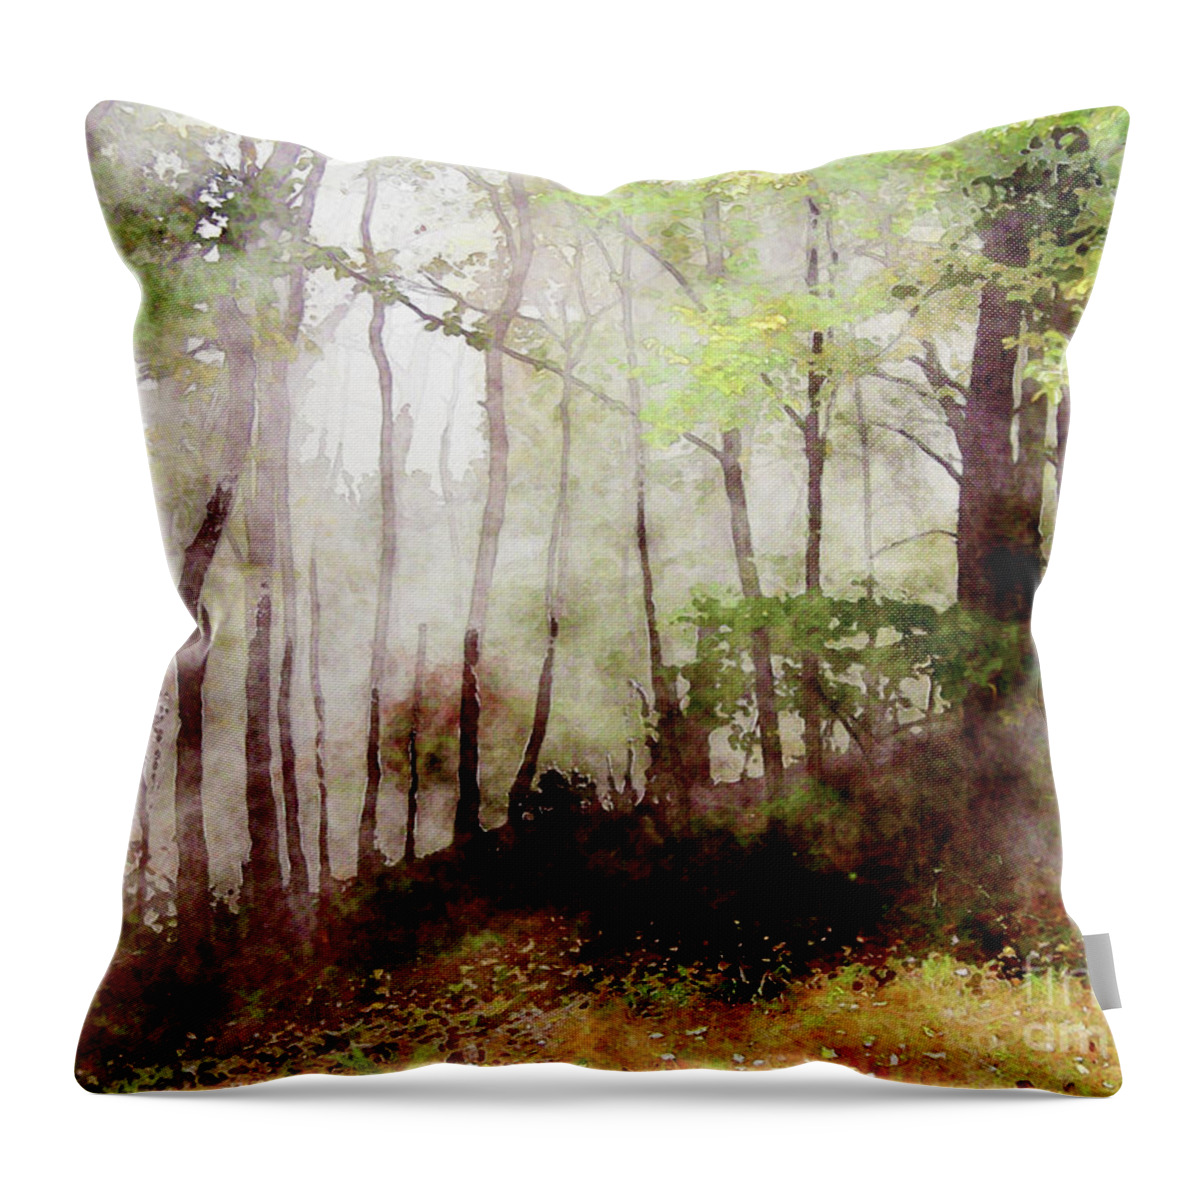 Tennessee Throw Pillow featuring the digital art Tennessee Forest Fog by Phil Perkins